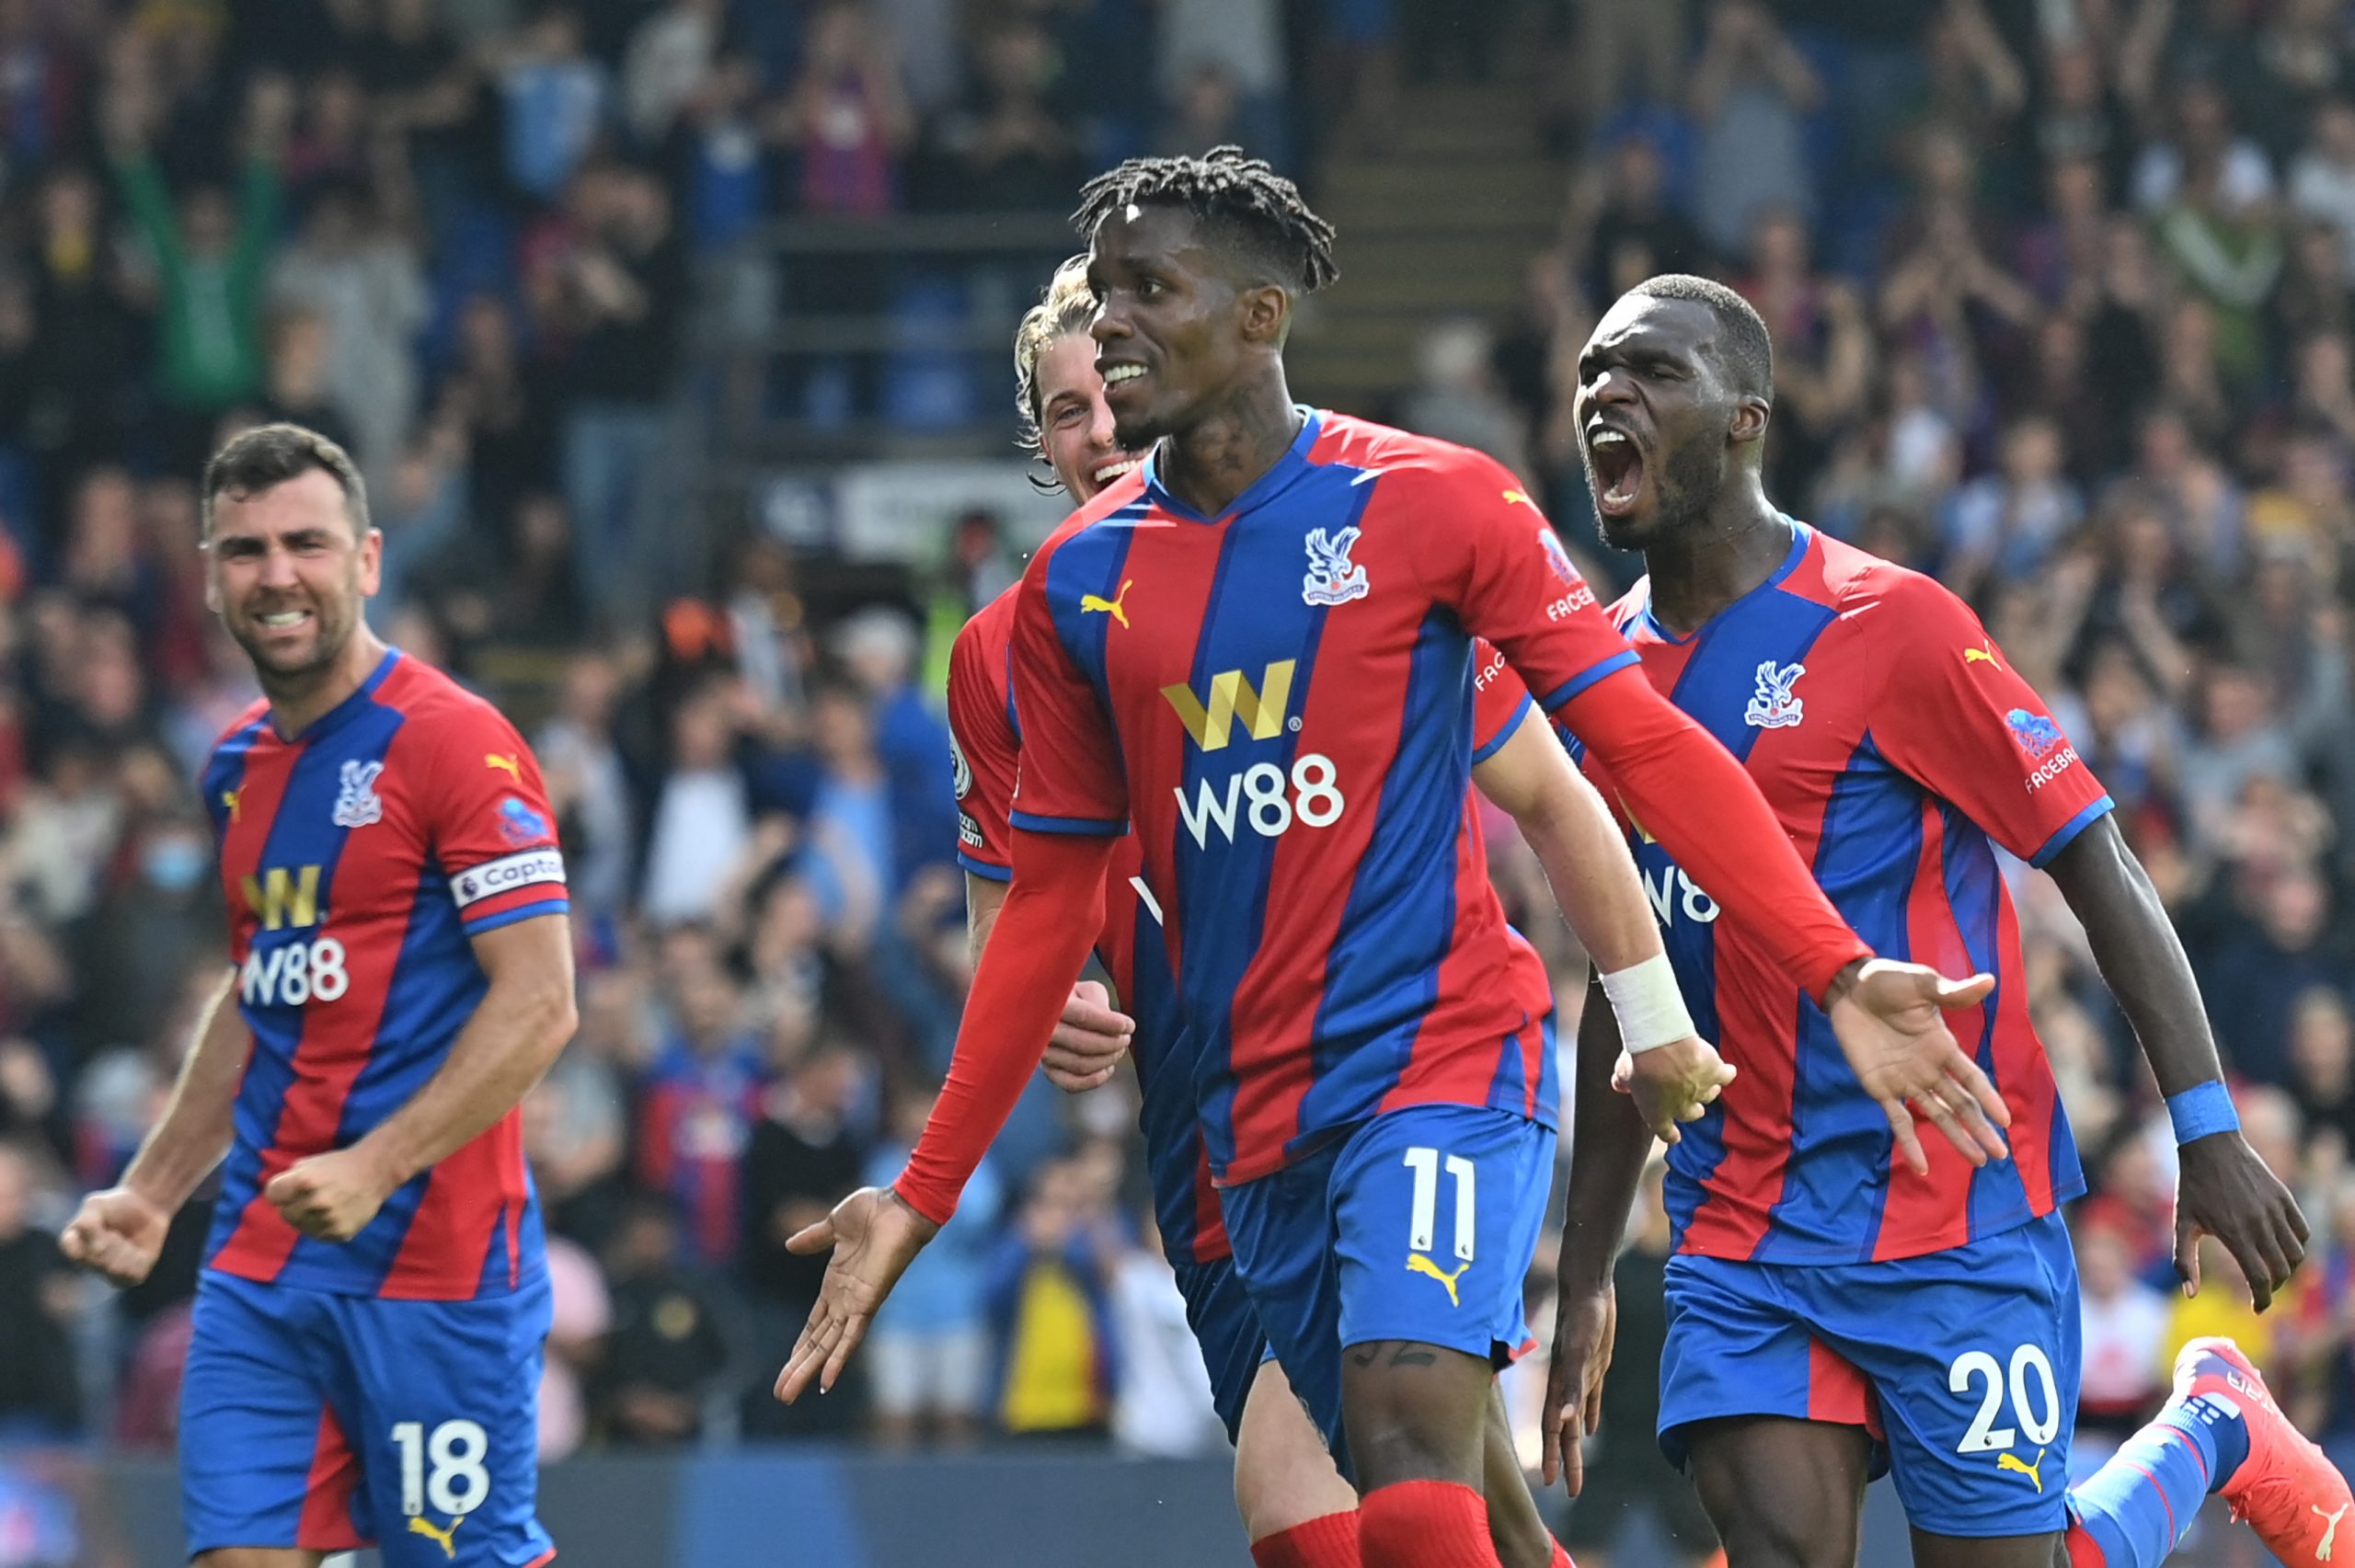 10-man Arsenal sink Crystal Palace to extend perfect start